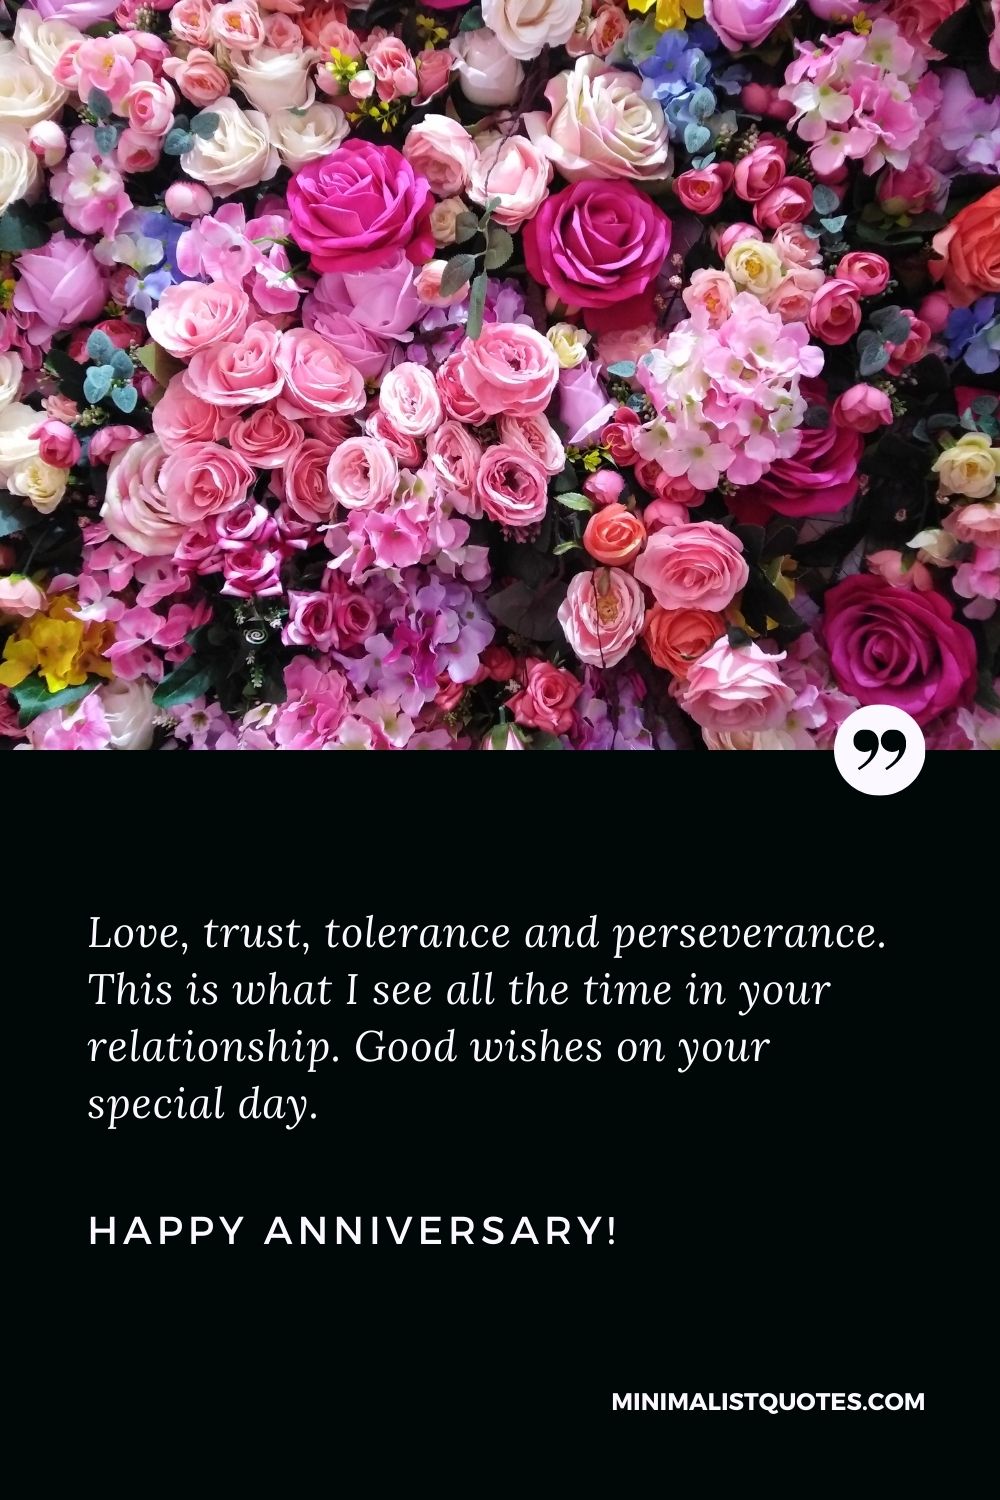 Wedding anniversary wishes for friend: Love, trust, tolerance and perseverance. This is what I see all the time in your relationship. Good wishes on your special day. Happy Anniversary!